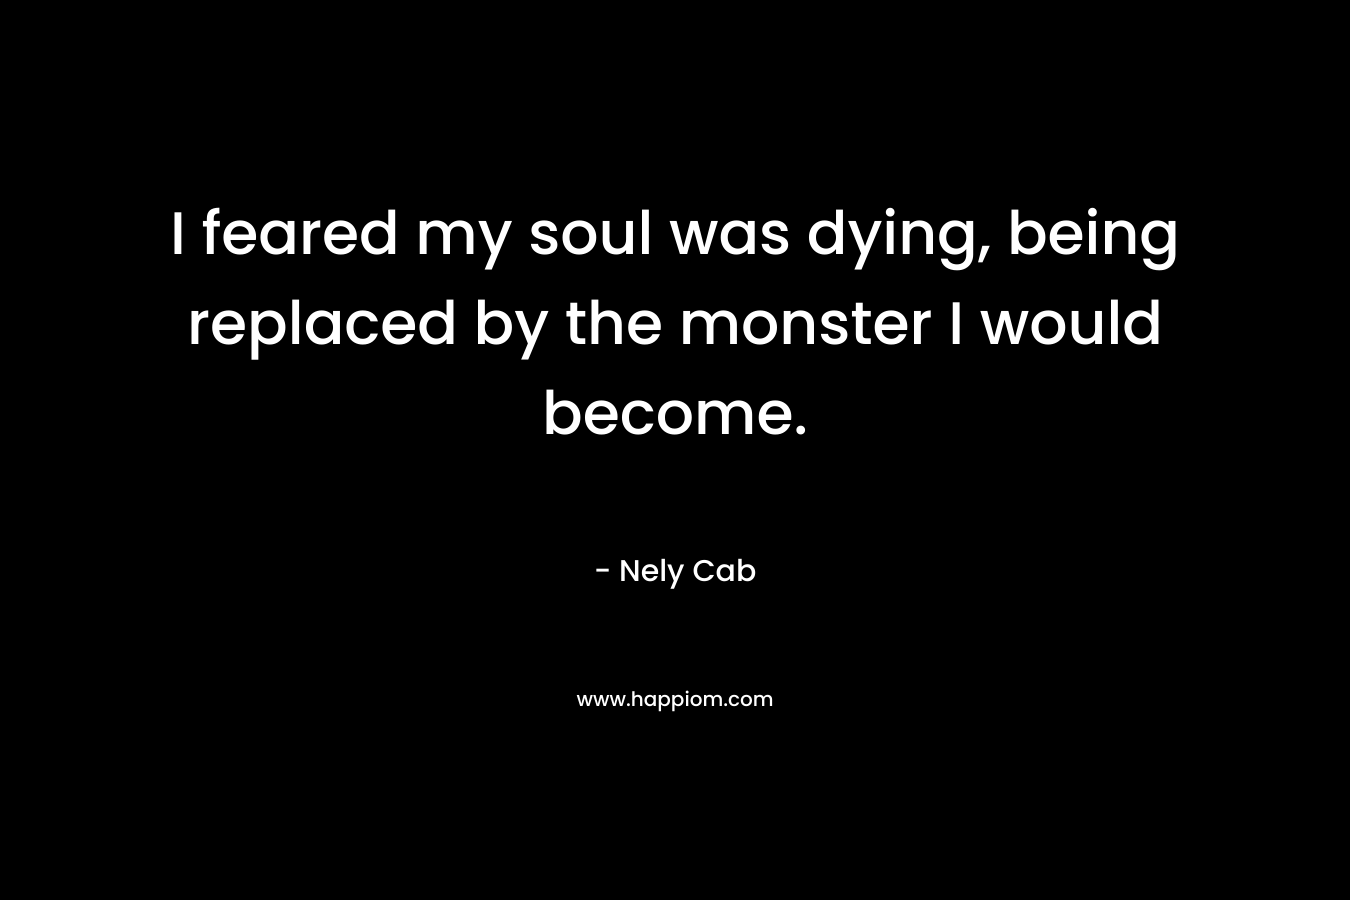 I feared my soul was dying, being replaced by the monster I would become. – Nely Cab